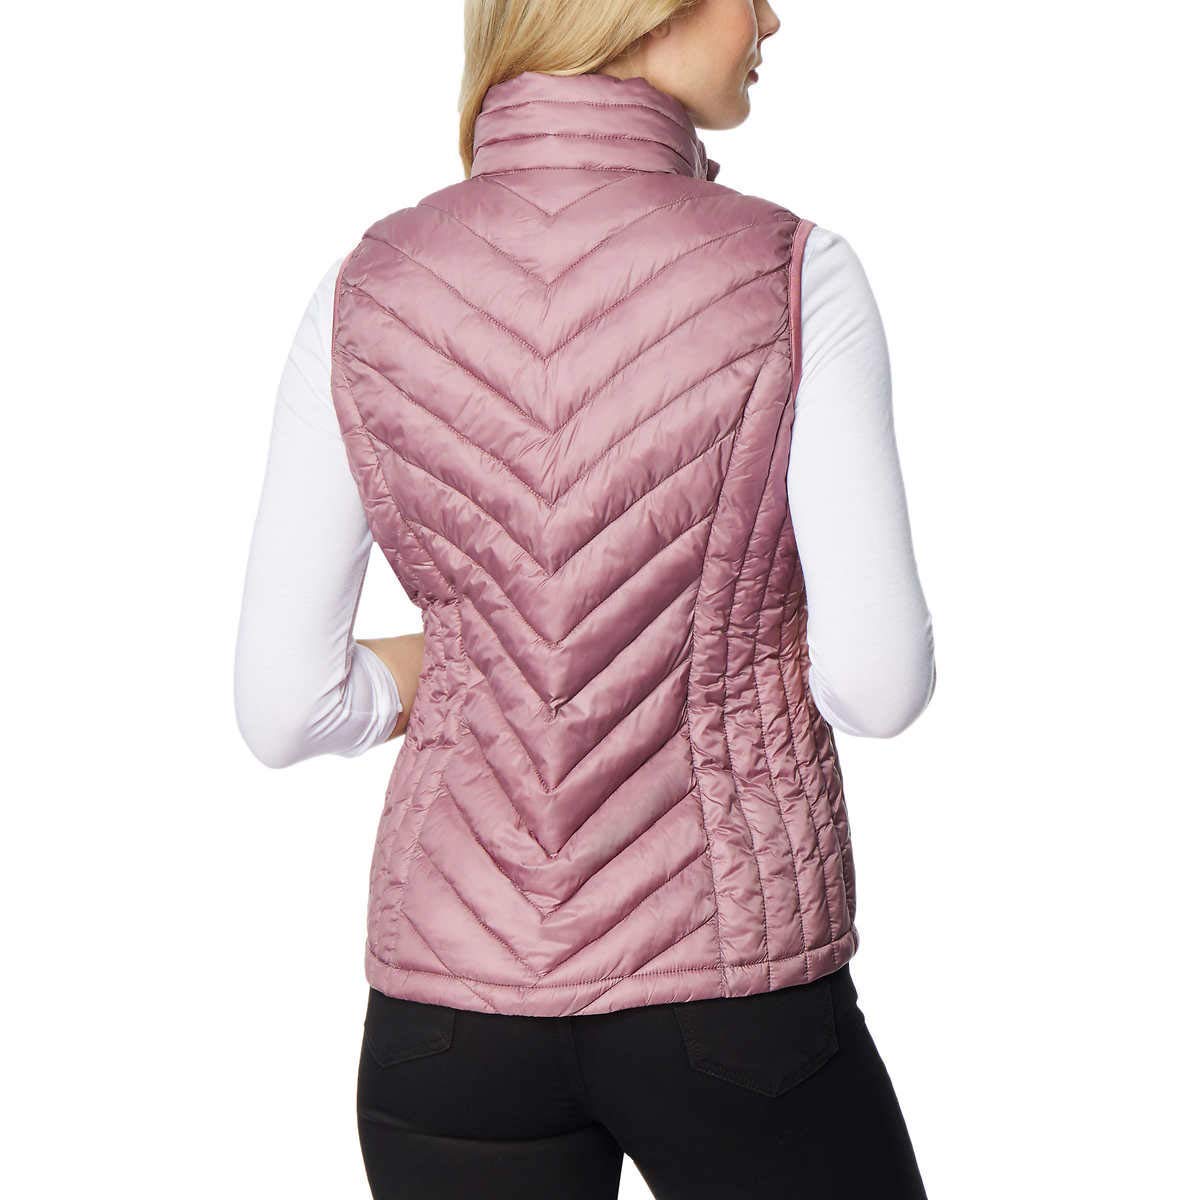 32 DEGREES Womens Packable Vest - Choose Size and Color | eBay